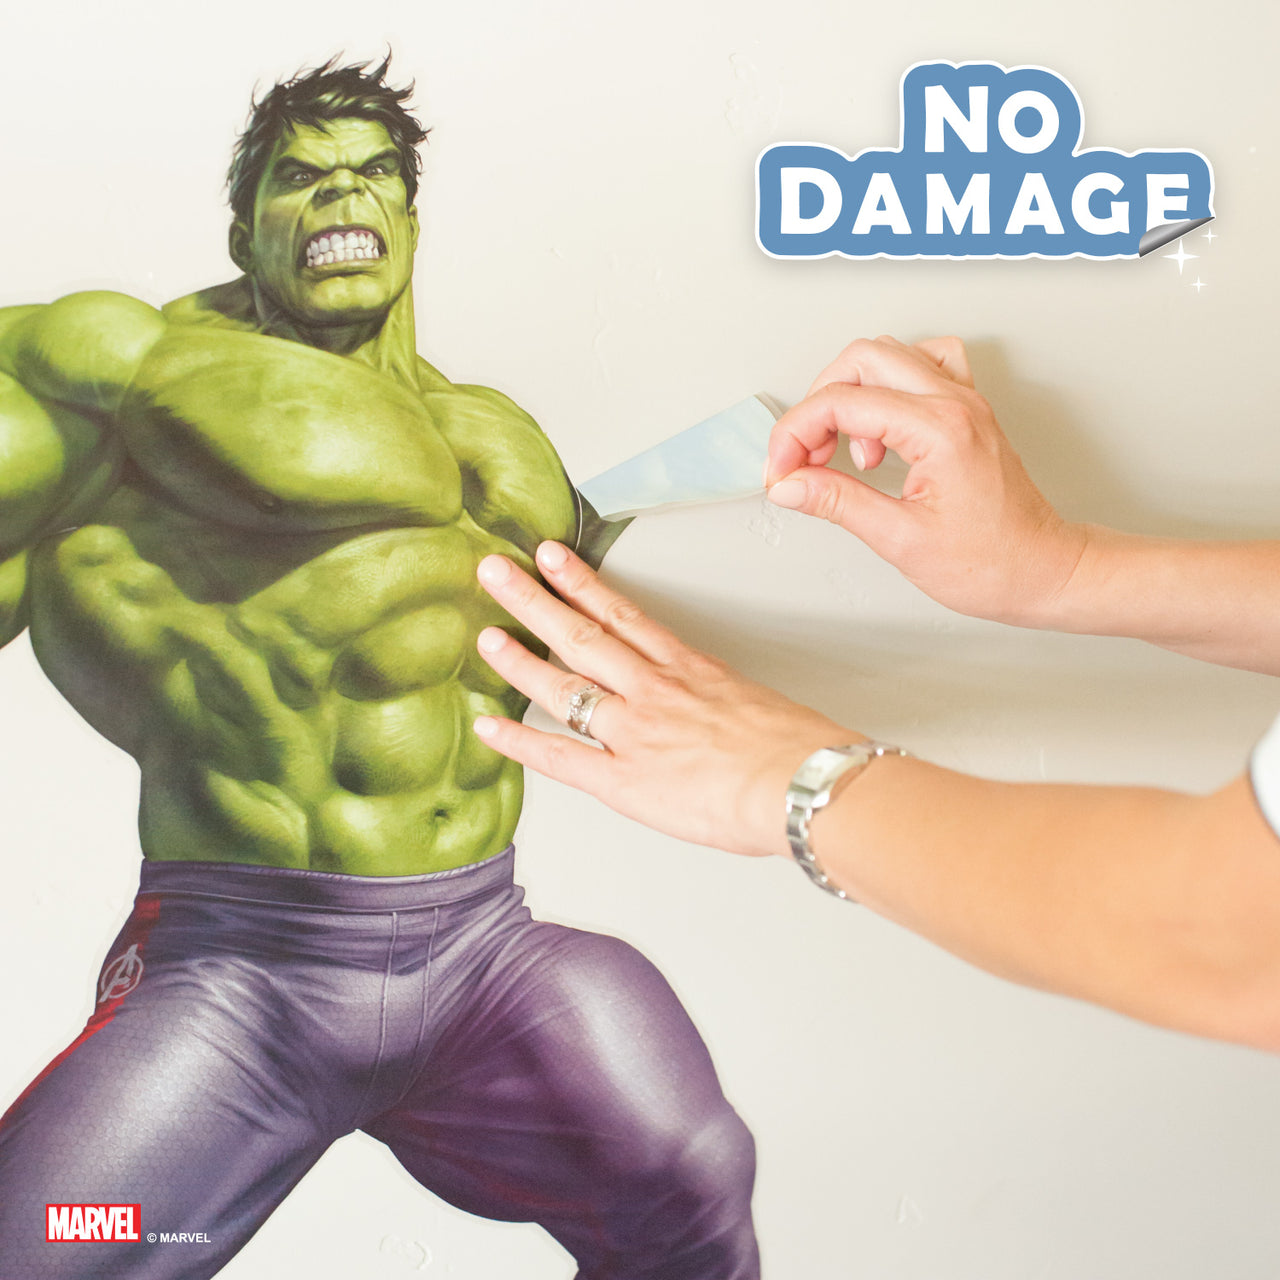 Hulk Decals for Walls